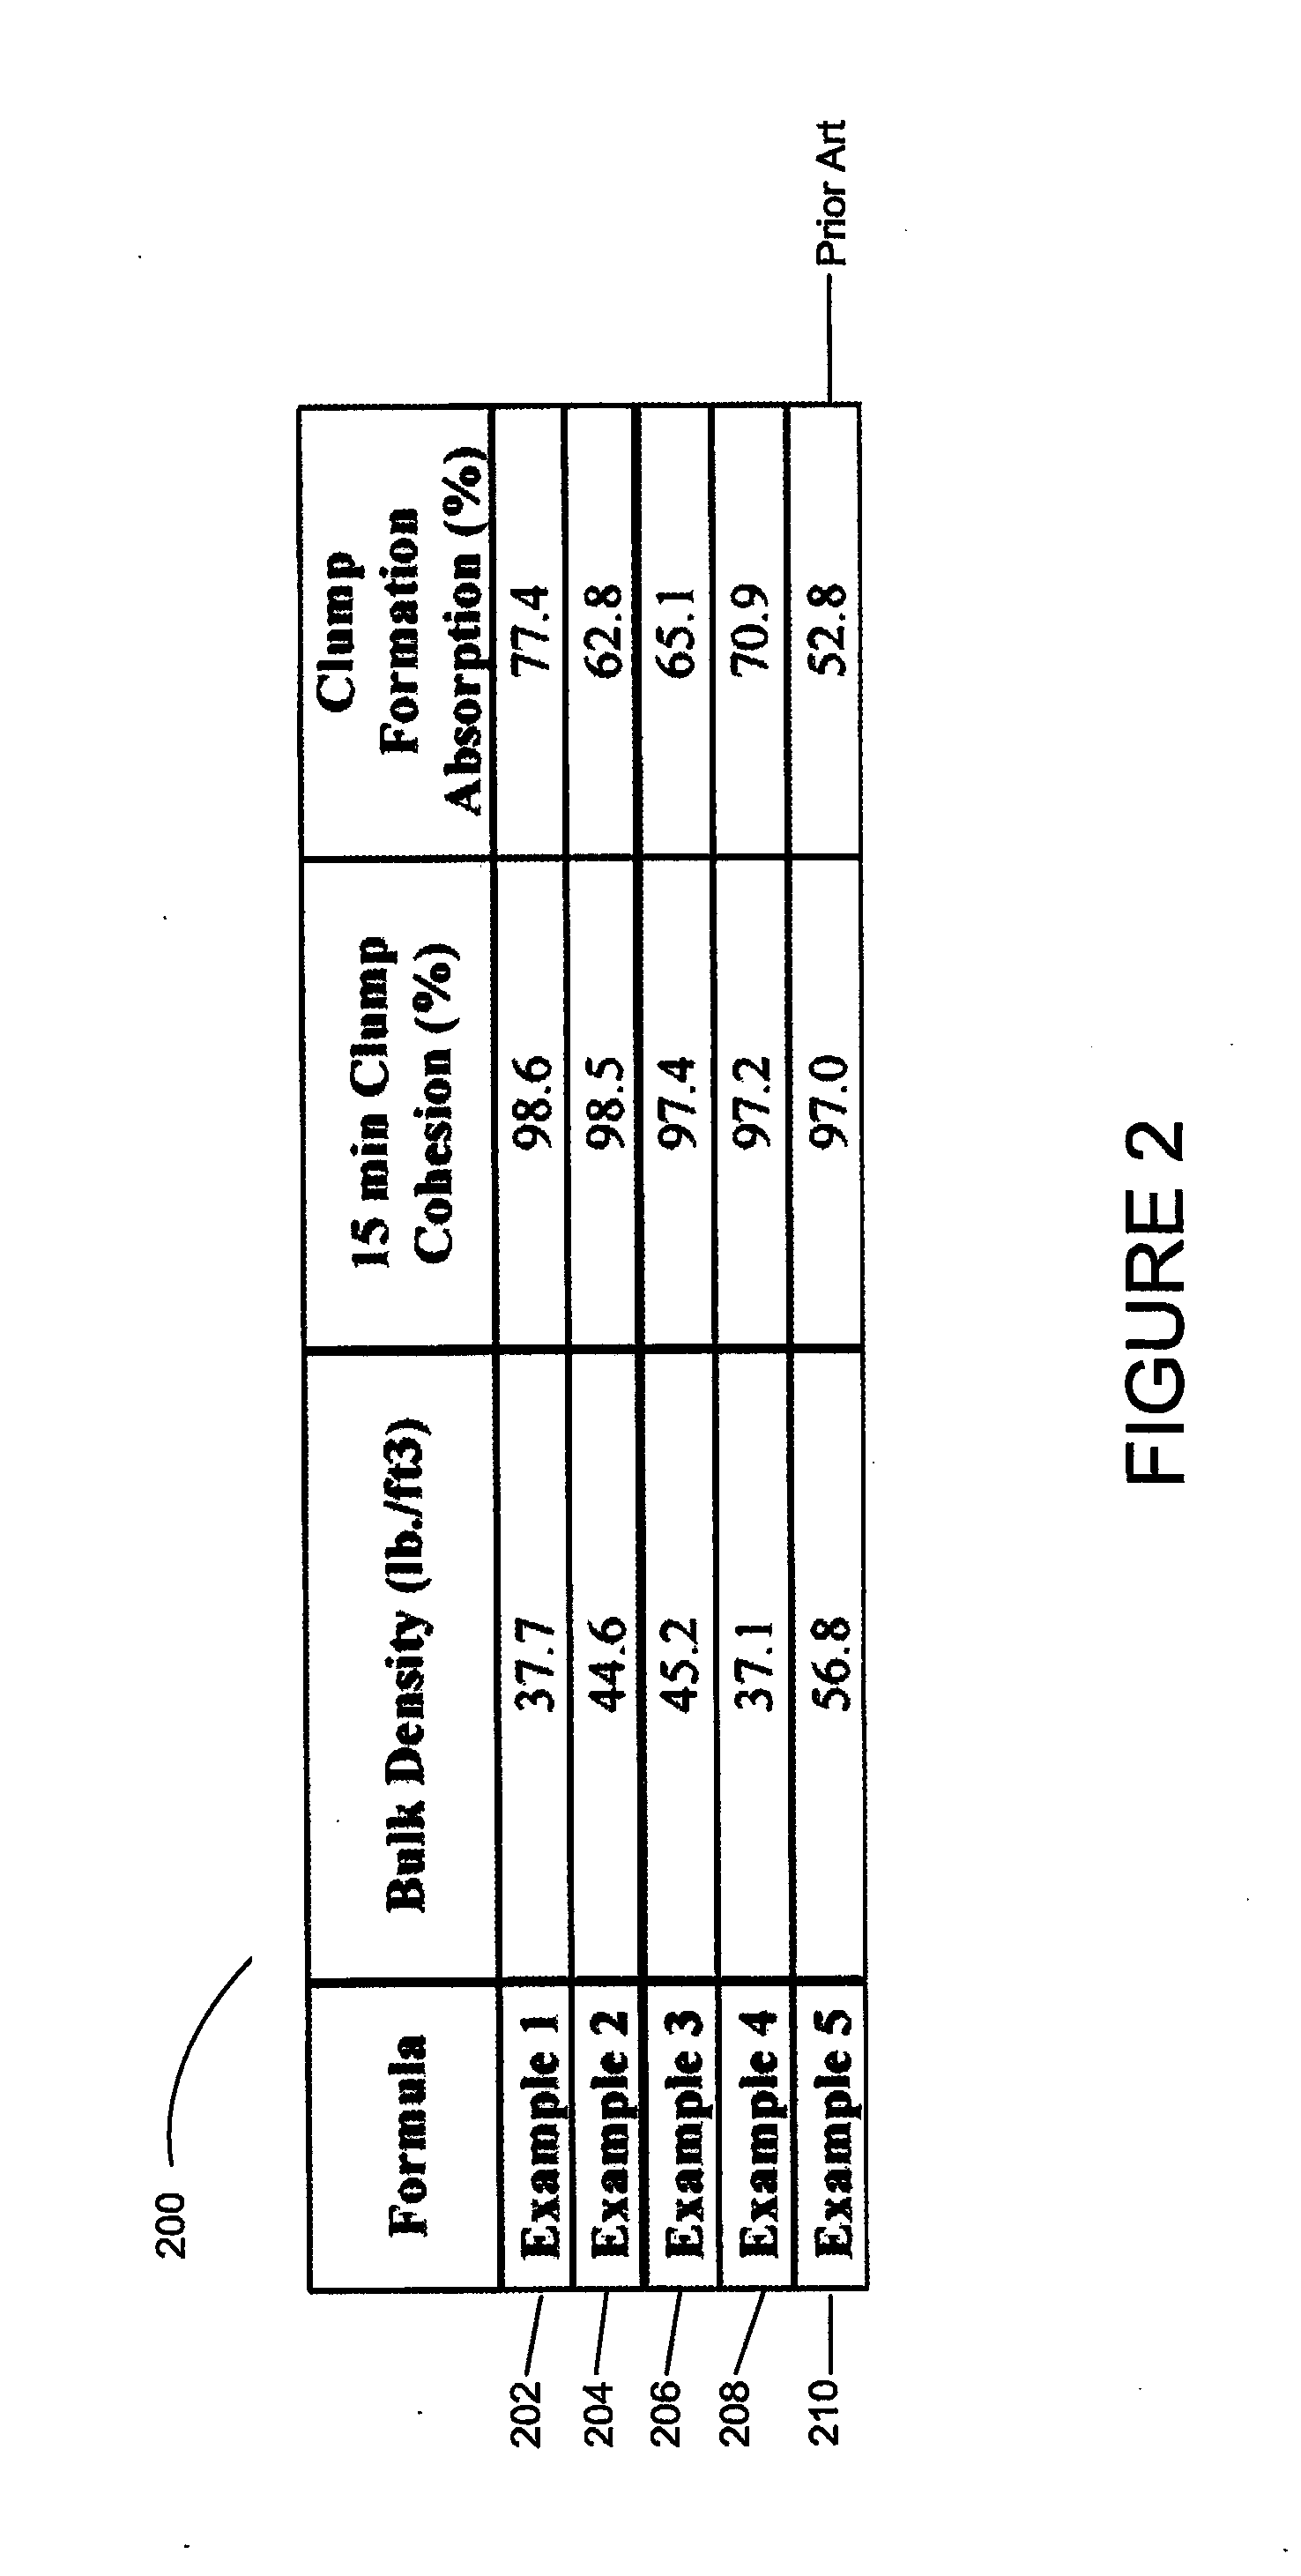 Hybrid composite coated animal litter compositions